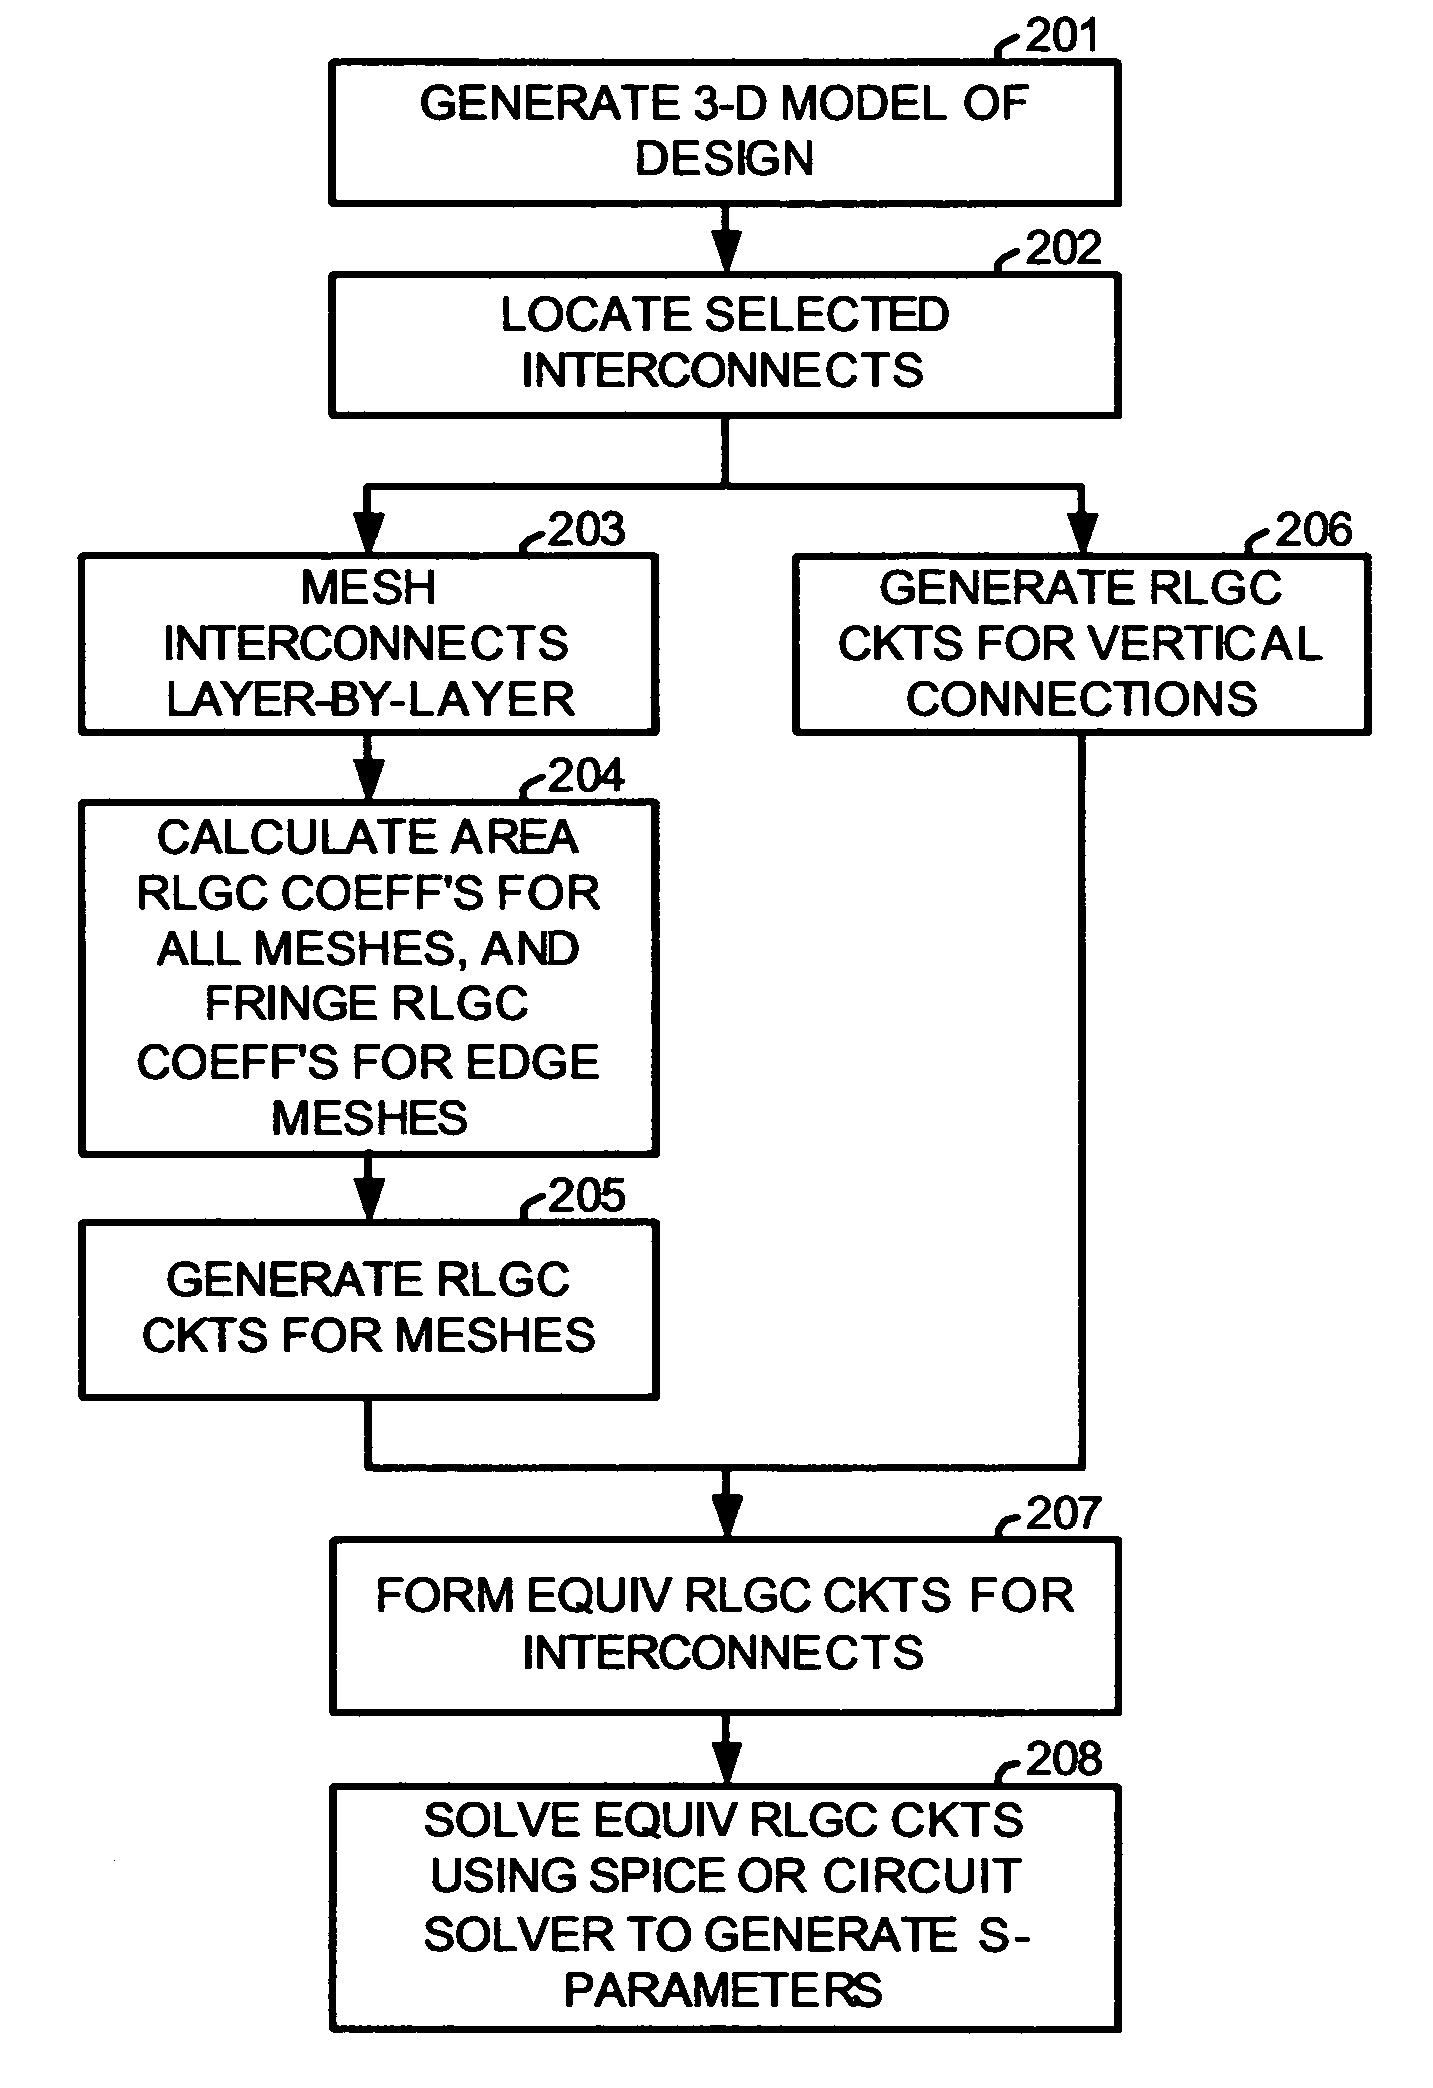 Fringe RLGC model for interconnect parasitic extraction